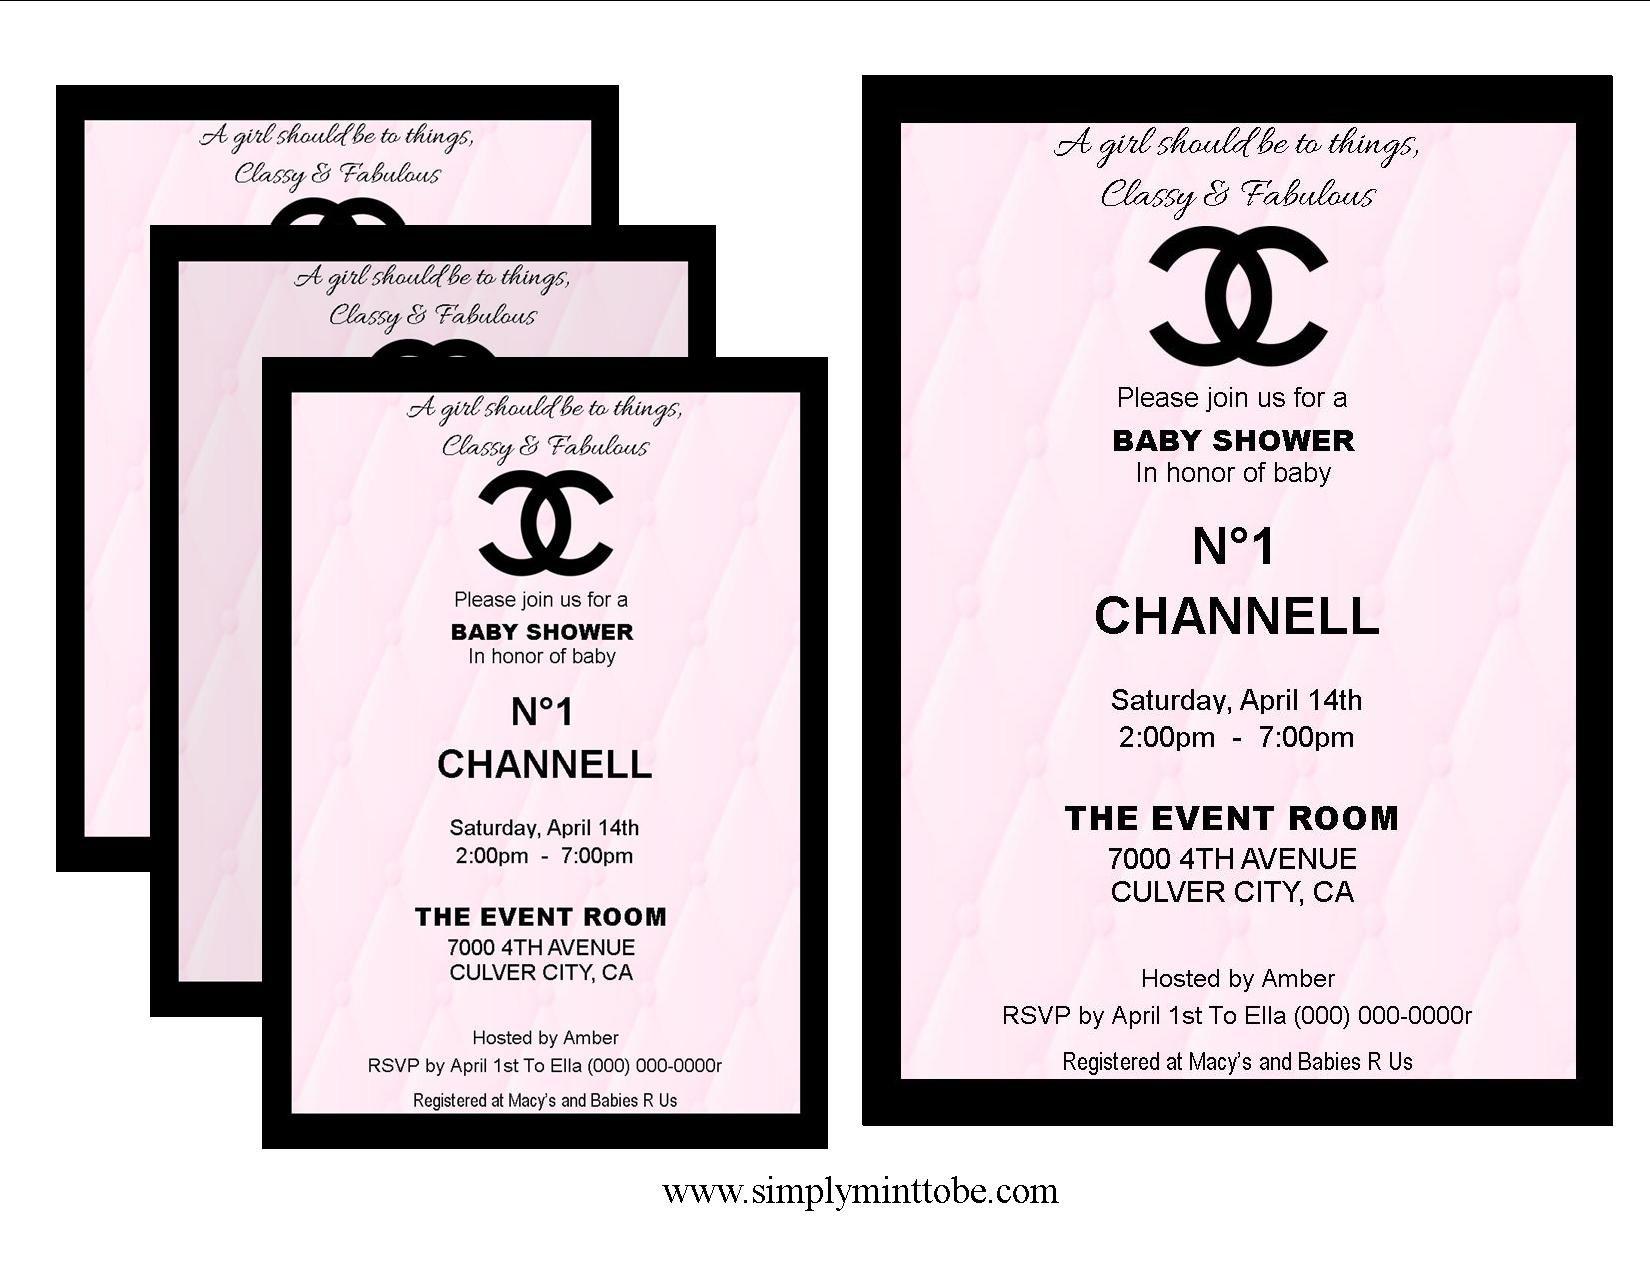 Classy Pink Chanel Logo - Coco Chanel Inspired Invitations Baby Shower Pink and Black Leather ...